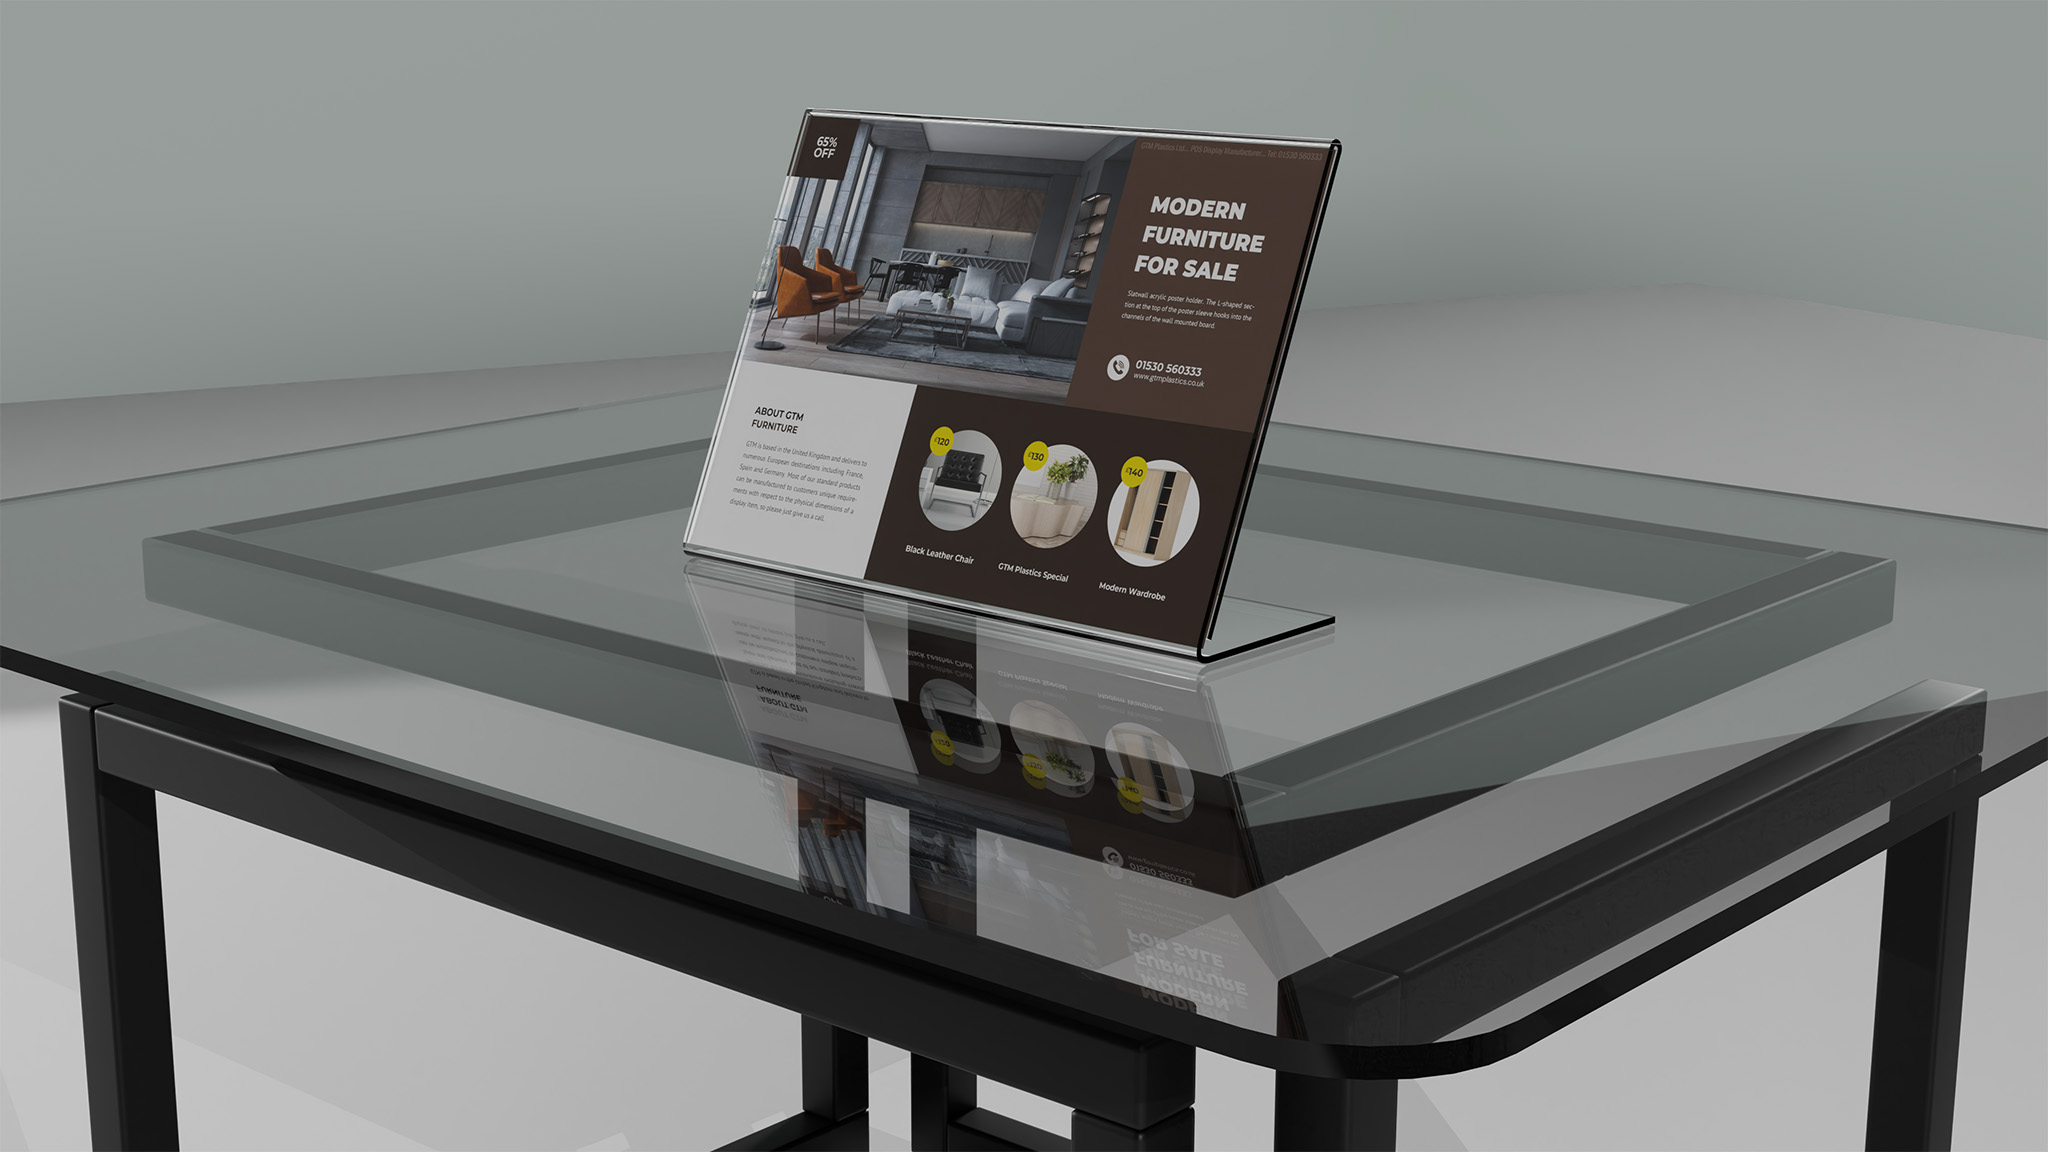 A sloping acrylic poster holder sitting on a glass top, metal frame dining table. The poster is advertising modern furniture for sale.